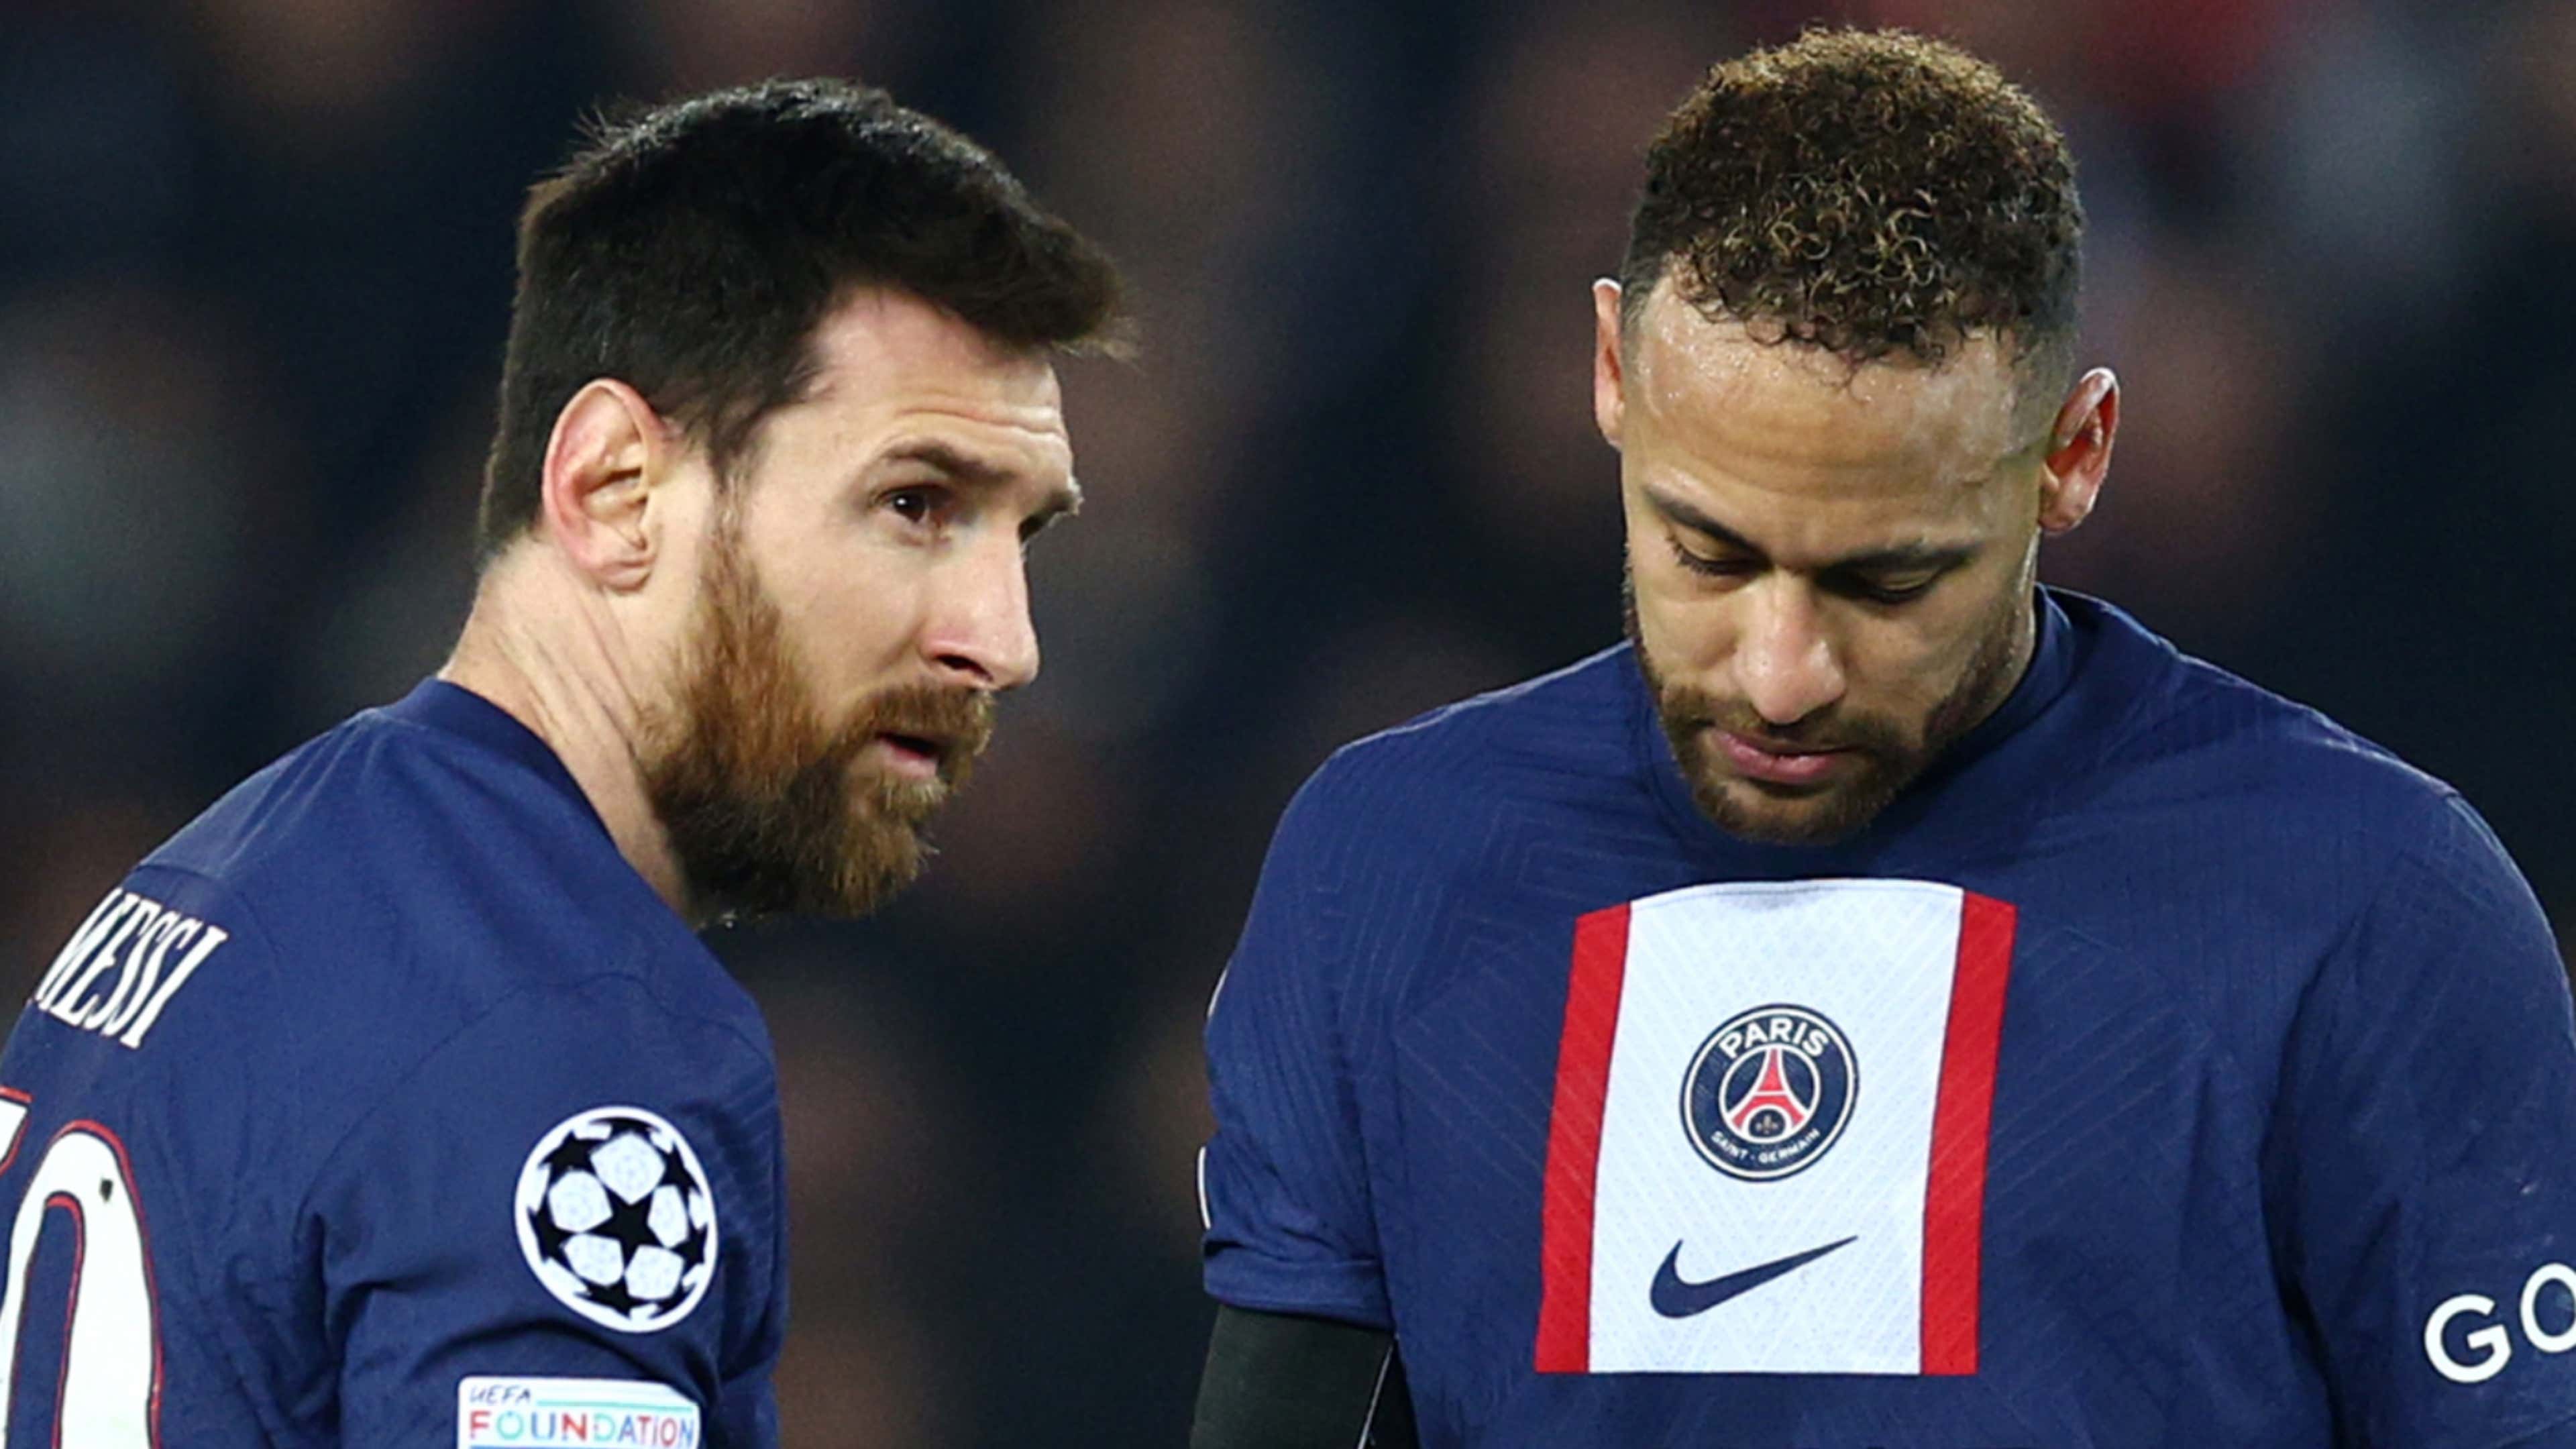 Paris Saint-Germain failed to 'support' Lionel Messi and Neymar